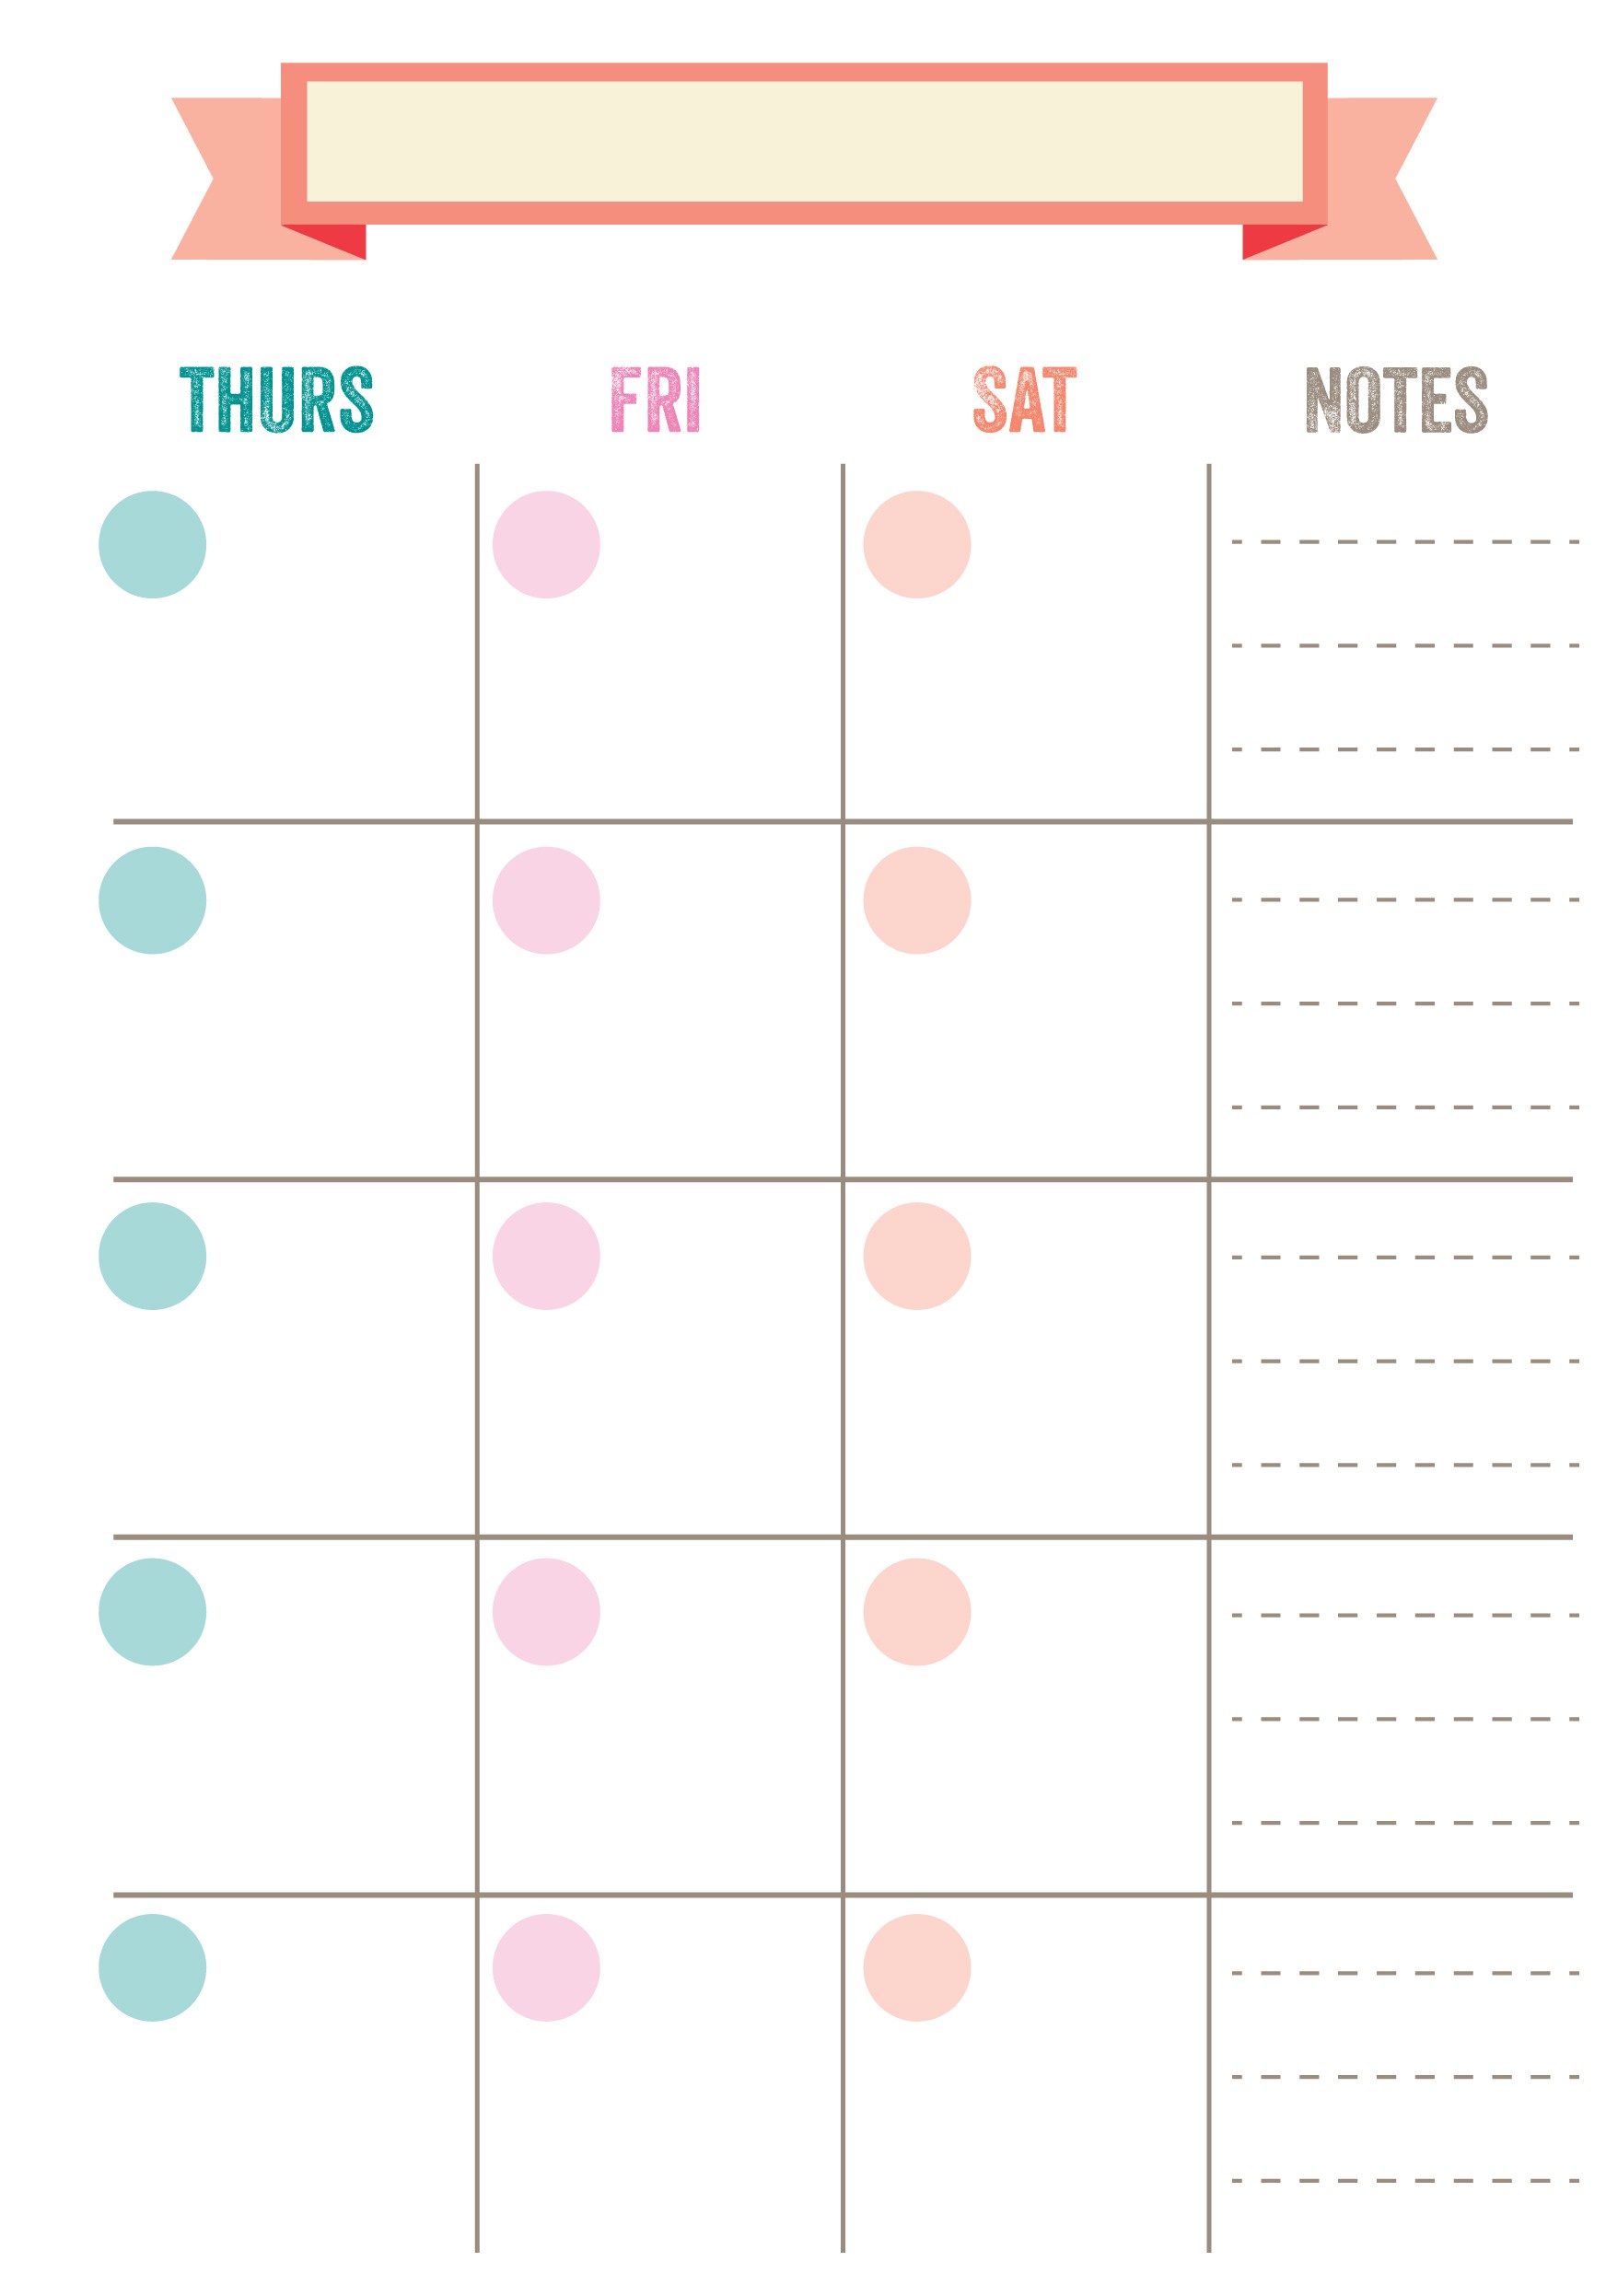 planner-printable-images-gallery-category-page-11-printablee